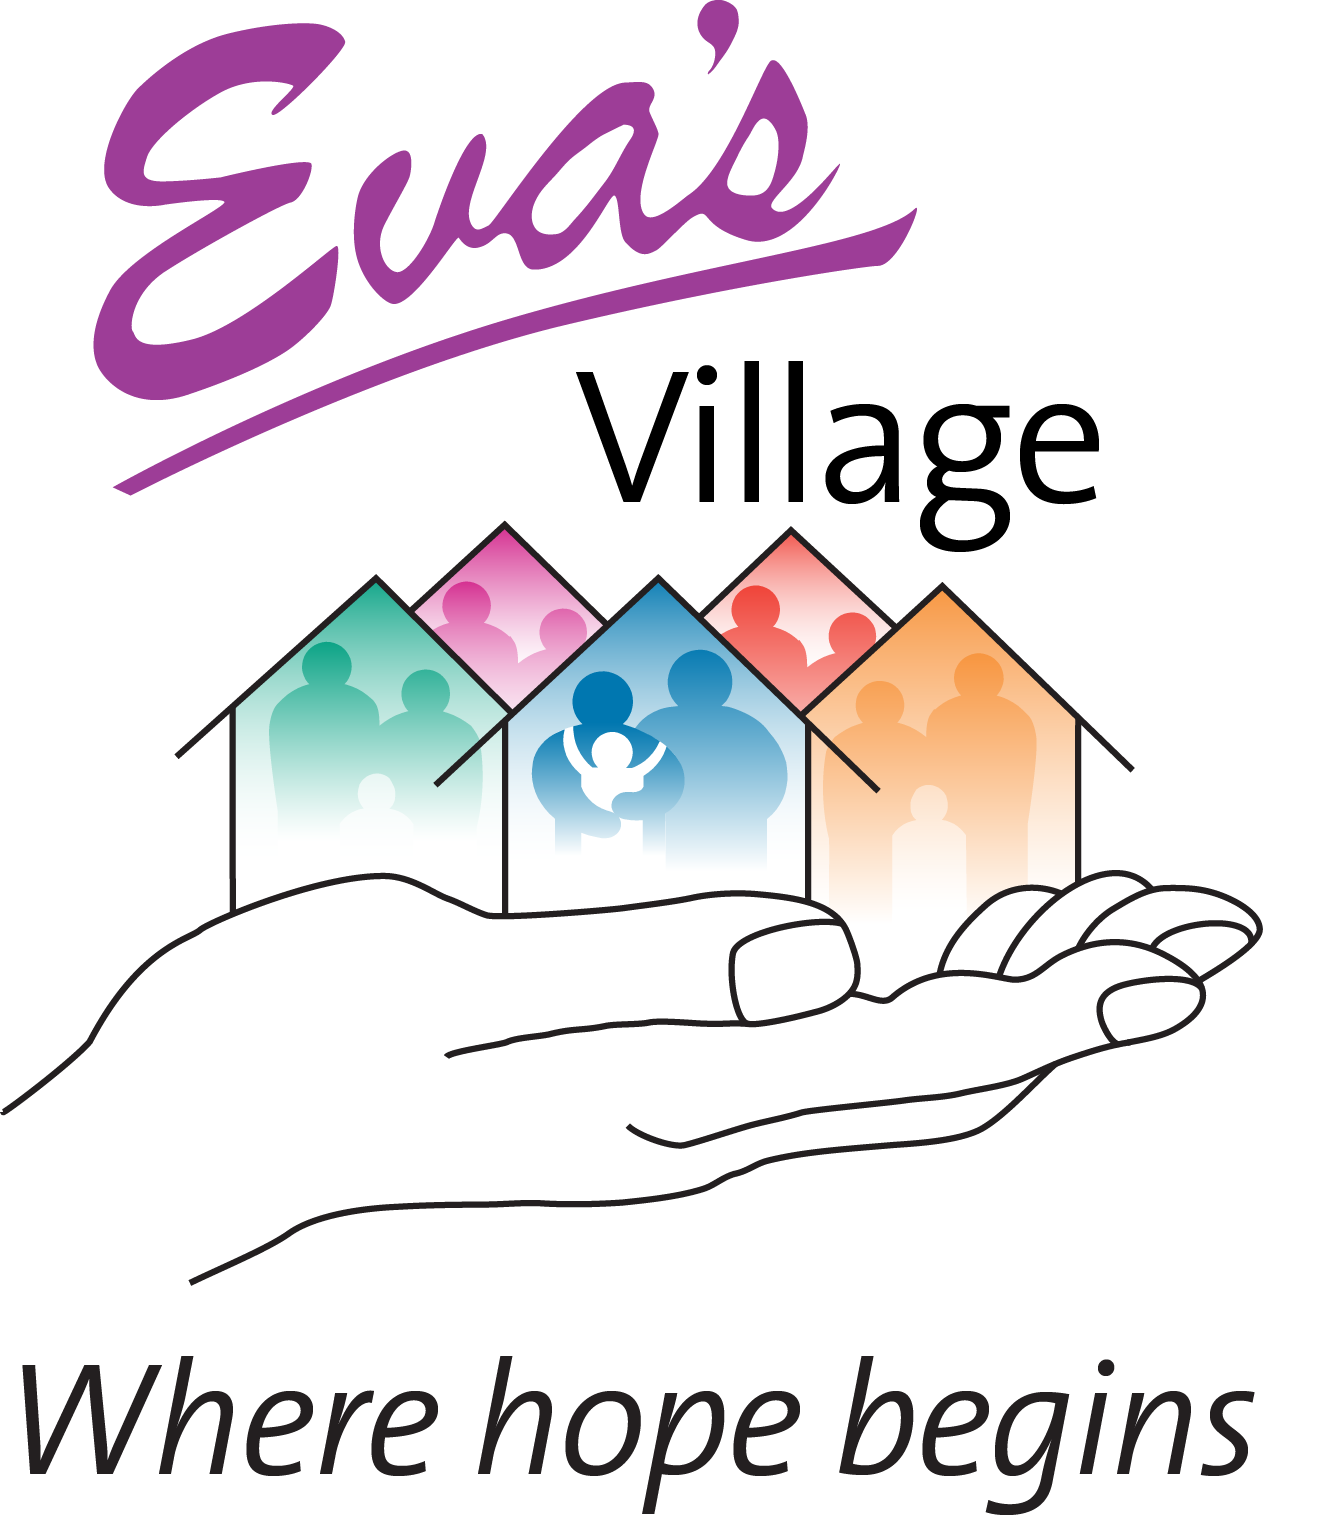 Eva’s Village mission is to feed the hungry, shelter the homeless, treat the addicted and provide medical and dental care to the poor with respect for the human dignity of each individual.